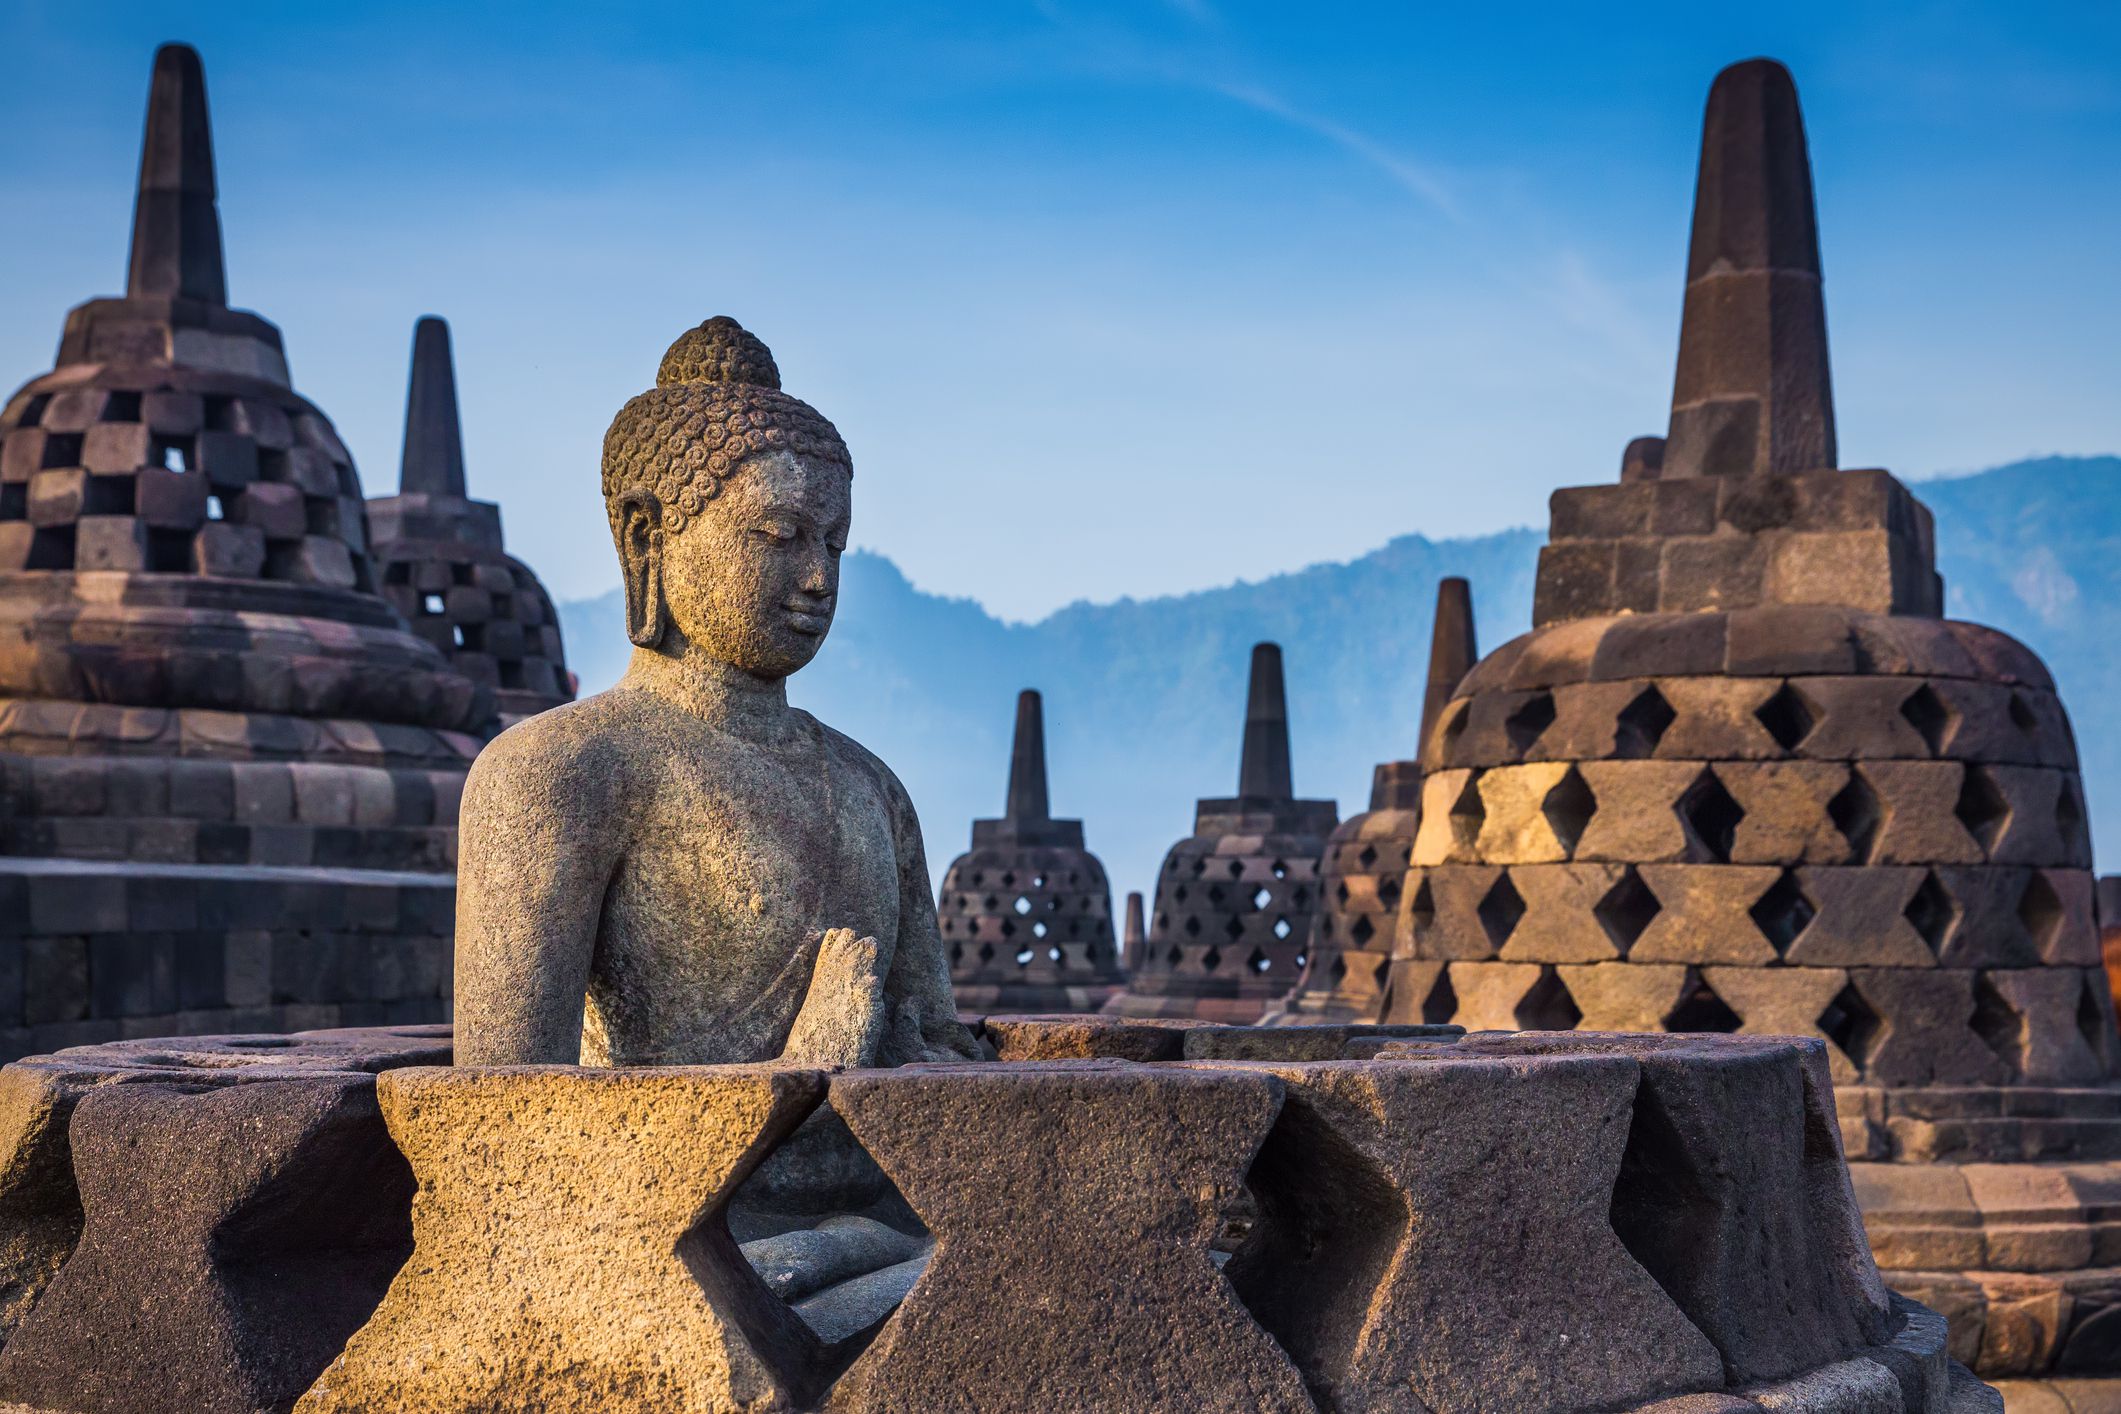 <p>Indonesia is expanding spiritual tourism to the Buddhist temple of Borobudur in the central Java Province. <a href="https://tidarheritage.org/">The Tidar Heritage Foundation</a> has put together a cultural program that they hope will make the site as relevant for spiritual pilgrimage as Jerusalem or Rome.</p><p>Borobudur is the largest Buddhist temple in the world, built in the 8th and 9th centuries. It has three tiers, including a pyramidal base, cone-shaped middle, and a stupa at the top.</p><p>The temple is adorned with 2,672 relief panels and 504 statues of Buddha. It’s a breathtaking temple to see in person, and you get a real sense of the scale.</p><p><em>“Borobudur Temple serves as a Buddhist place of worship, and the artwork features the stories and teachings of Buddha. As one of the seven wonders of the world, it’s visited by millions of people every year and holds deep cultural significance.”</em> – Mal Hellyer from <a href="https://rawmalroams.com/">Raw Mal Roams</a>.</p>